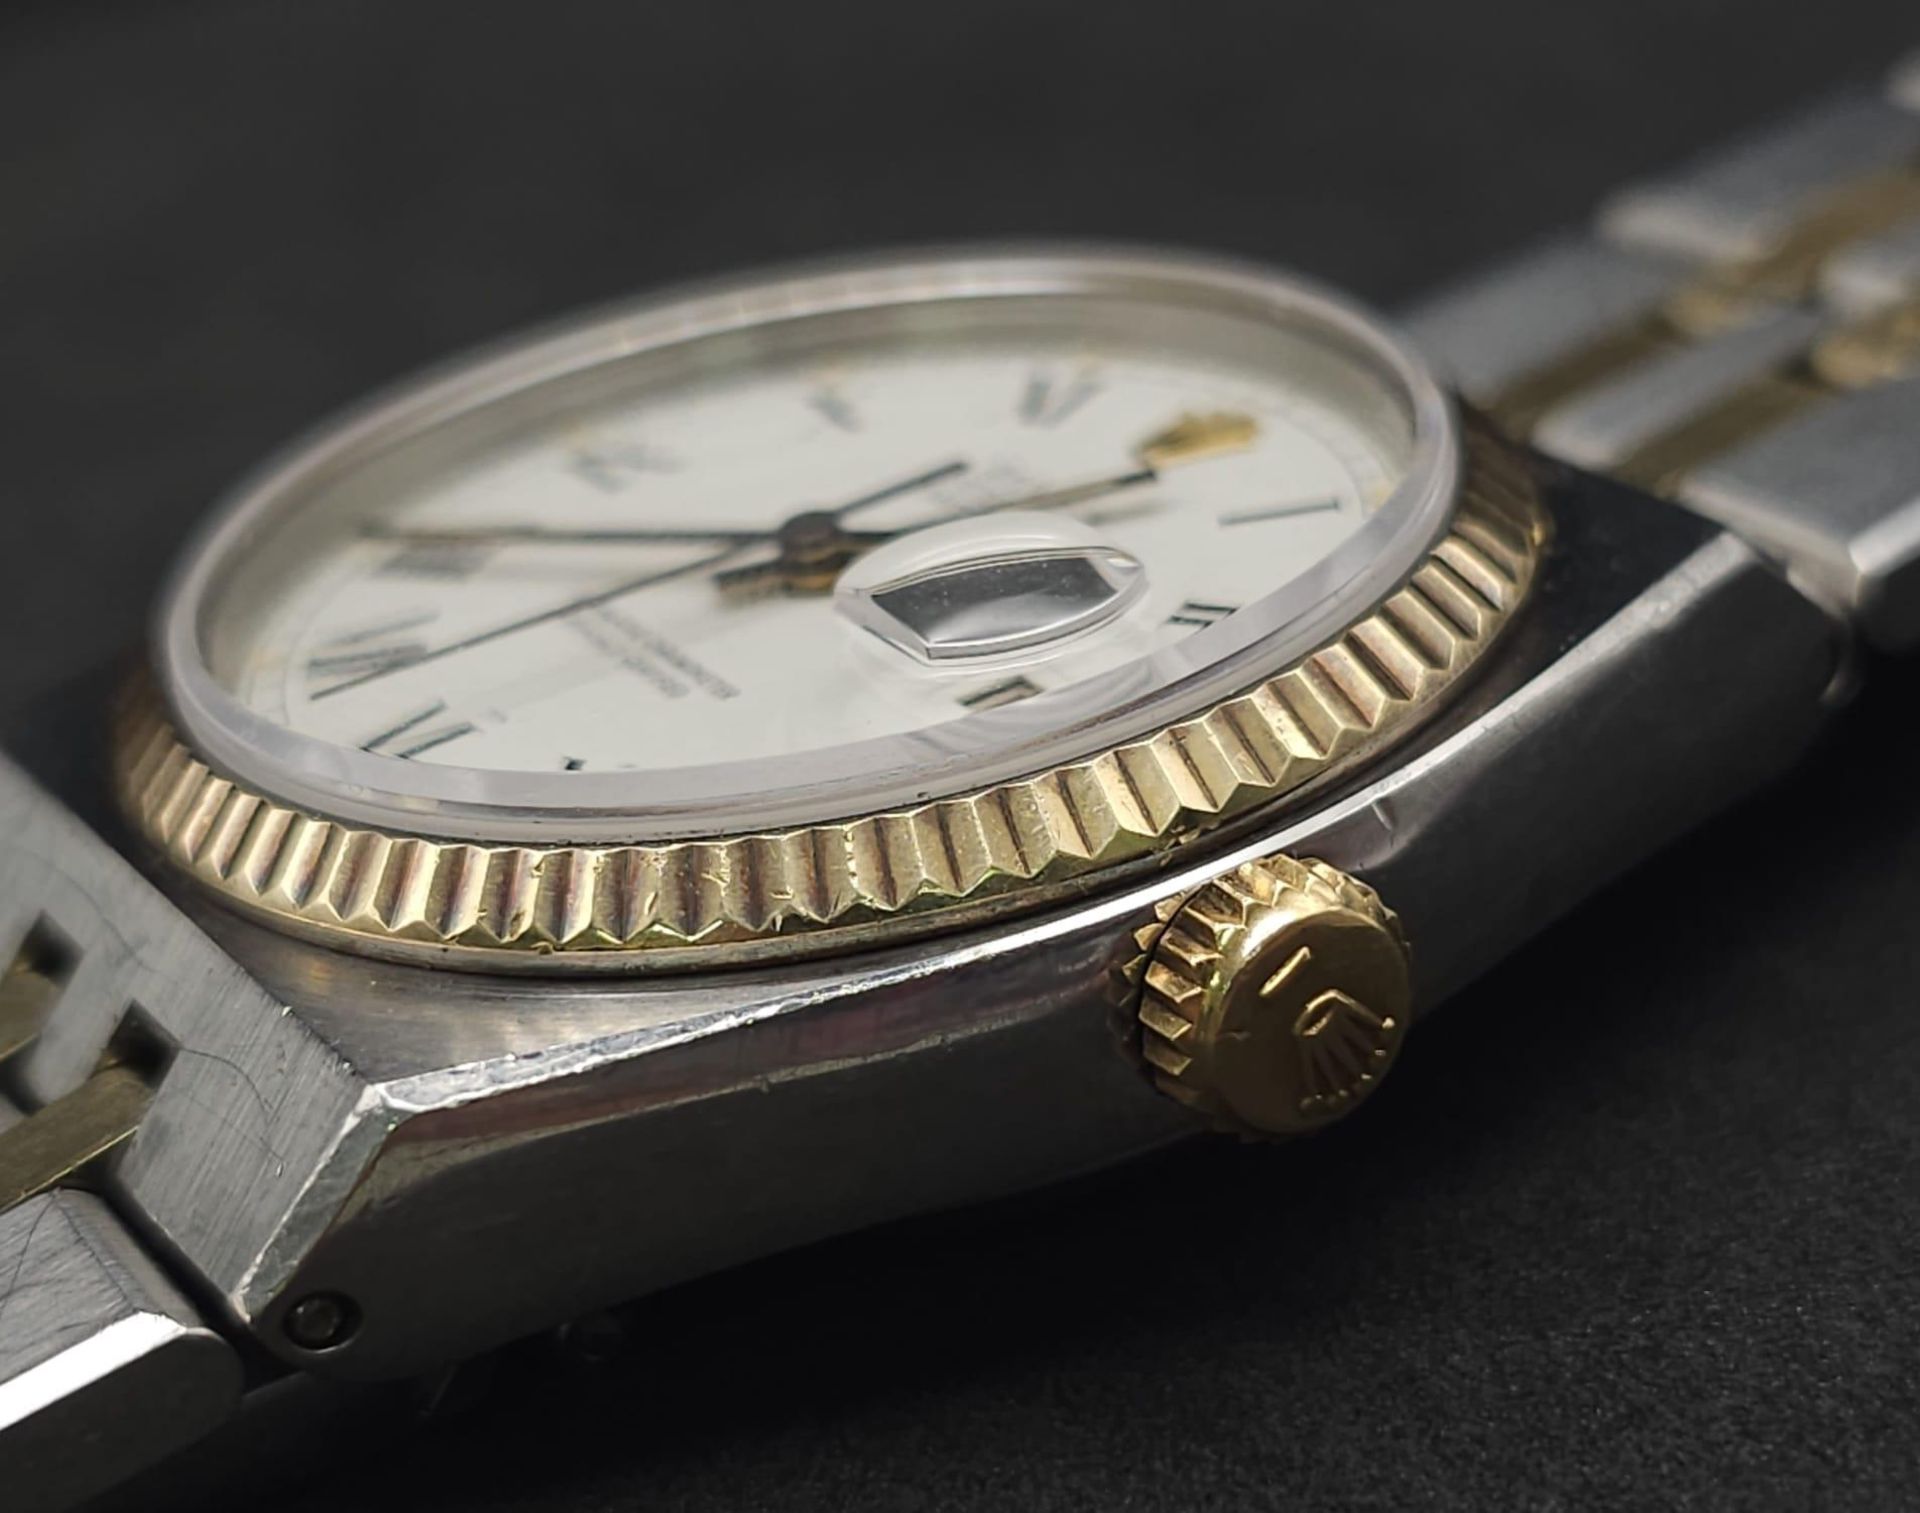 A Rare Bi-Metal Rolex Oyster Quartz Datejust Gents Watch. Gold and stainless steel bracelet and case - Image 20 of 21